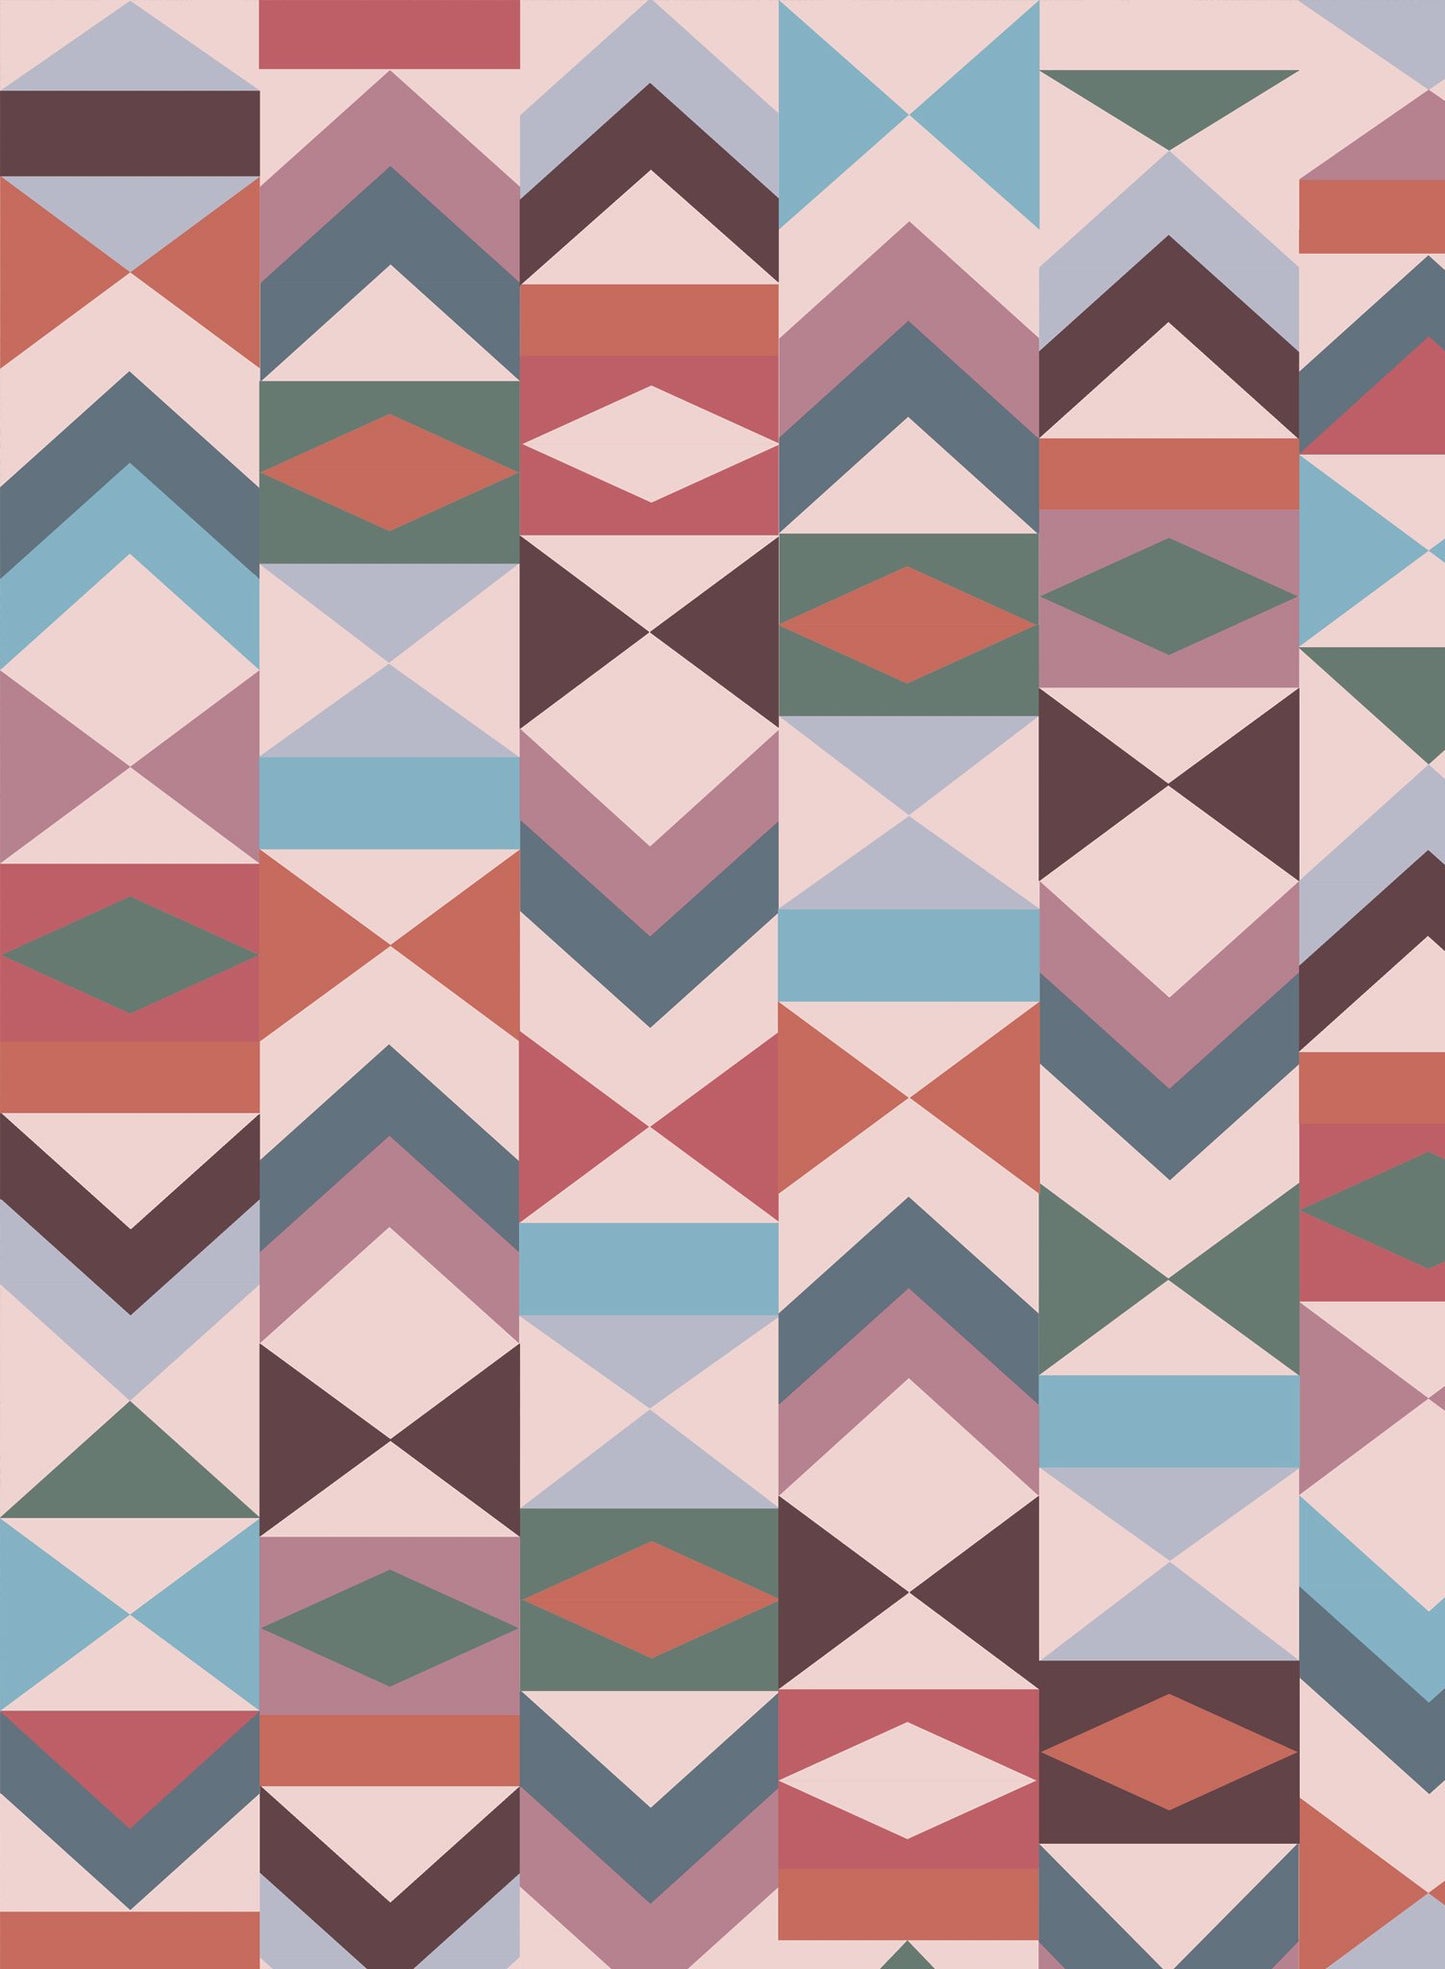 Tangram is a minimalist wallpaper by Opposite Wall of various vertical arrangements of colourful triangles.